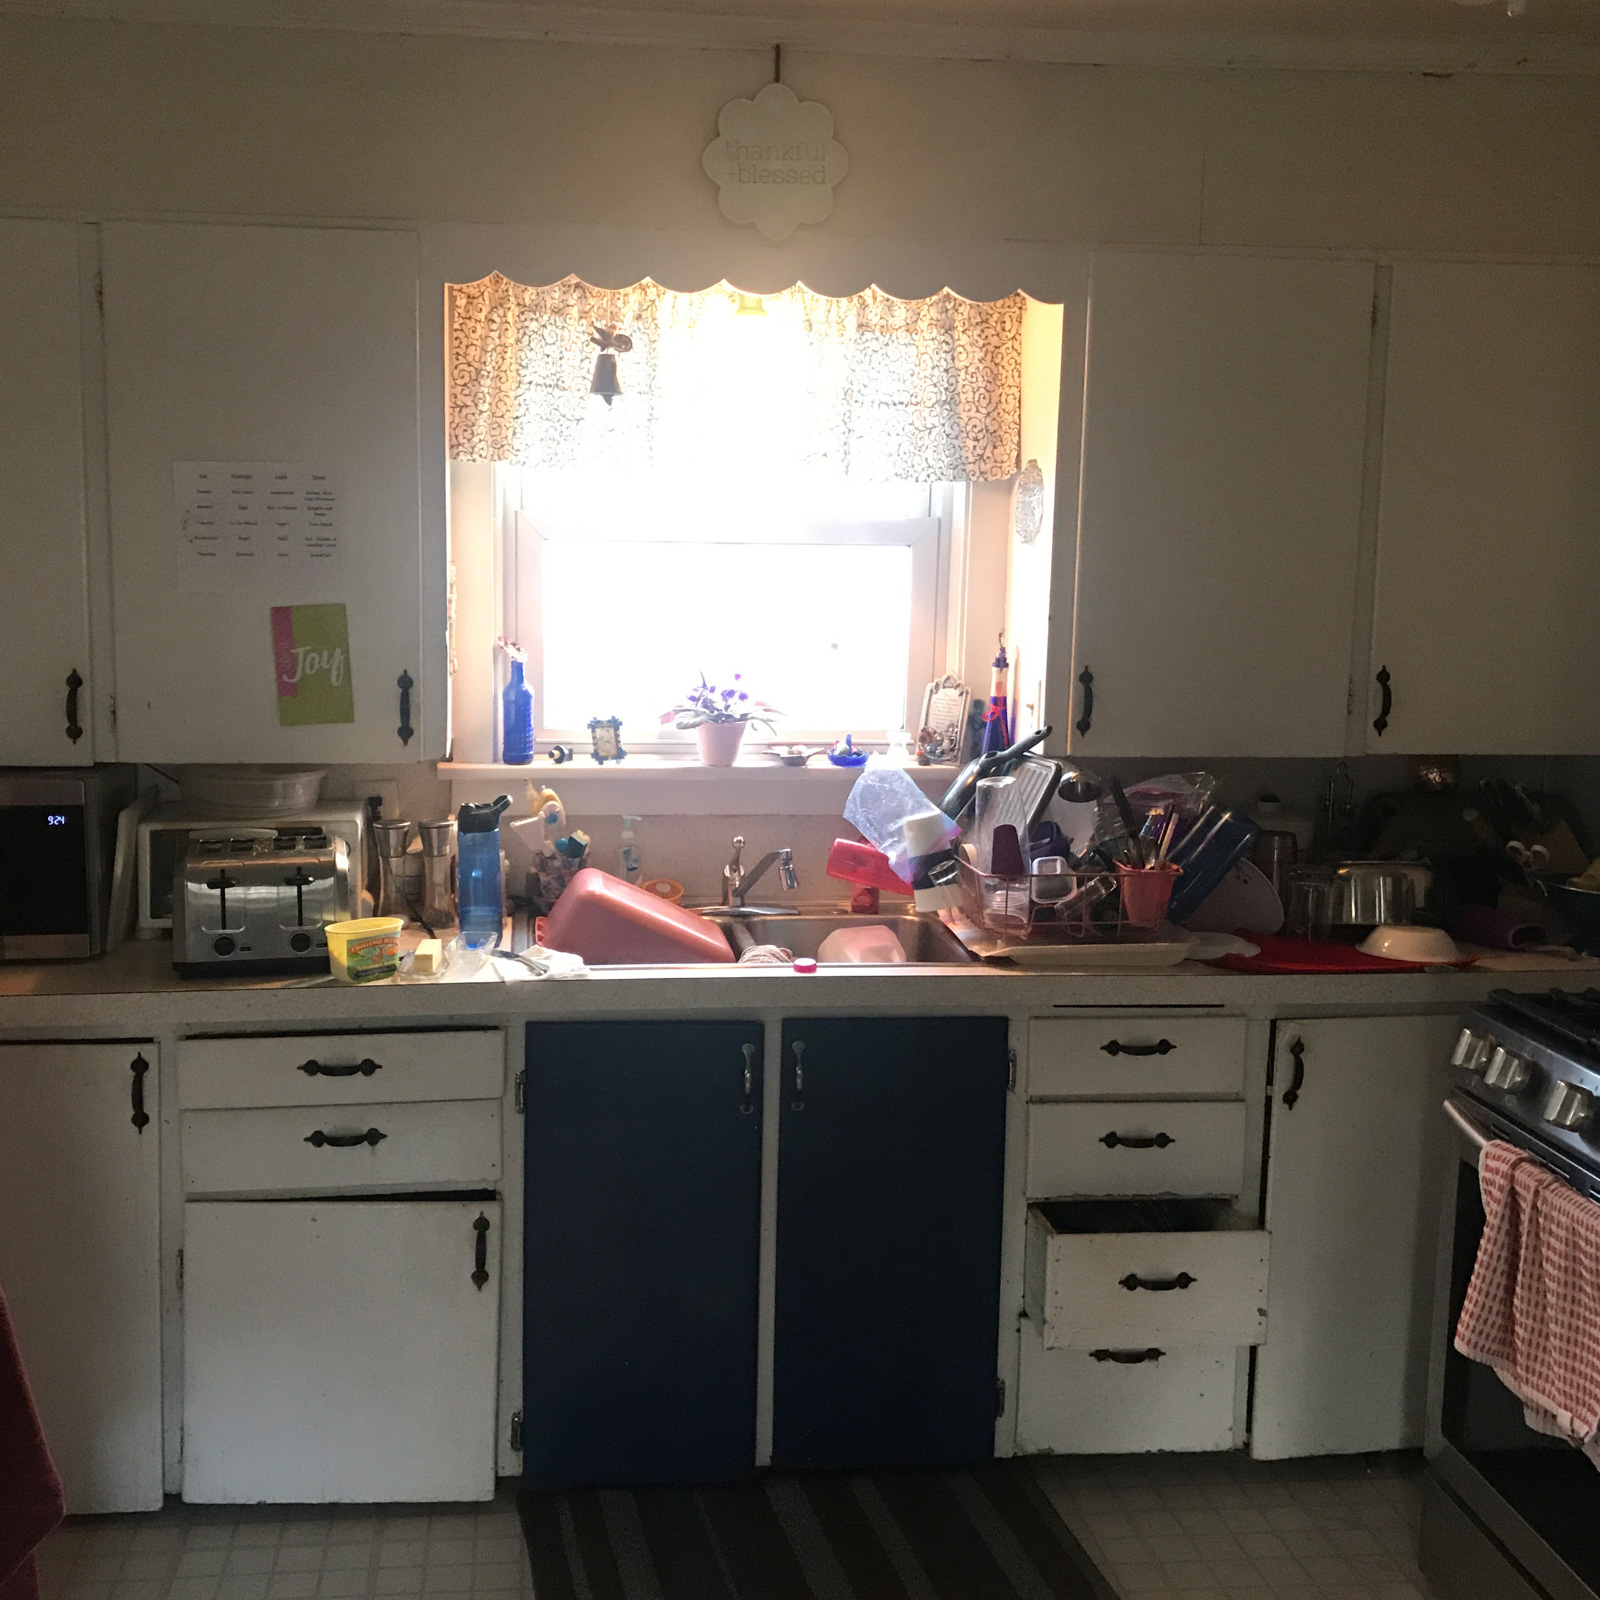 Entry 150 - Wear & tear plus zero functionality kitchen screams for a make-over